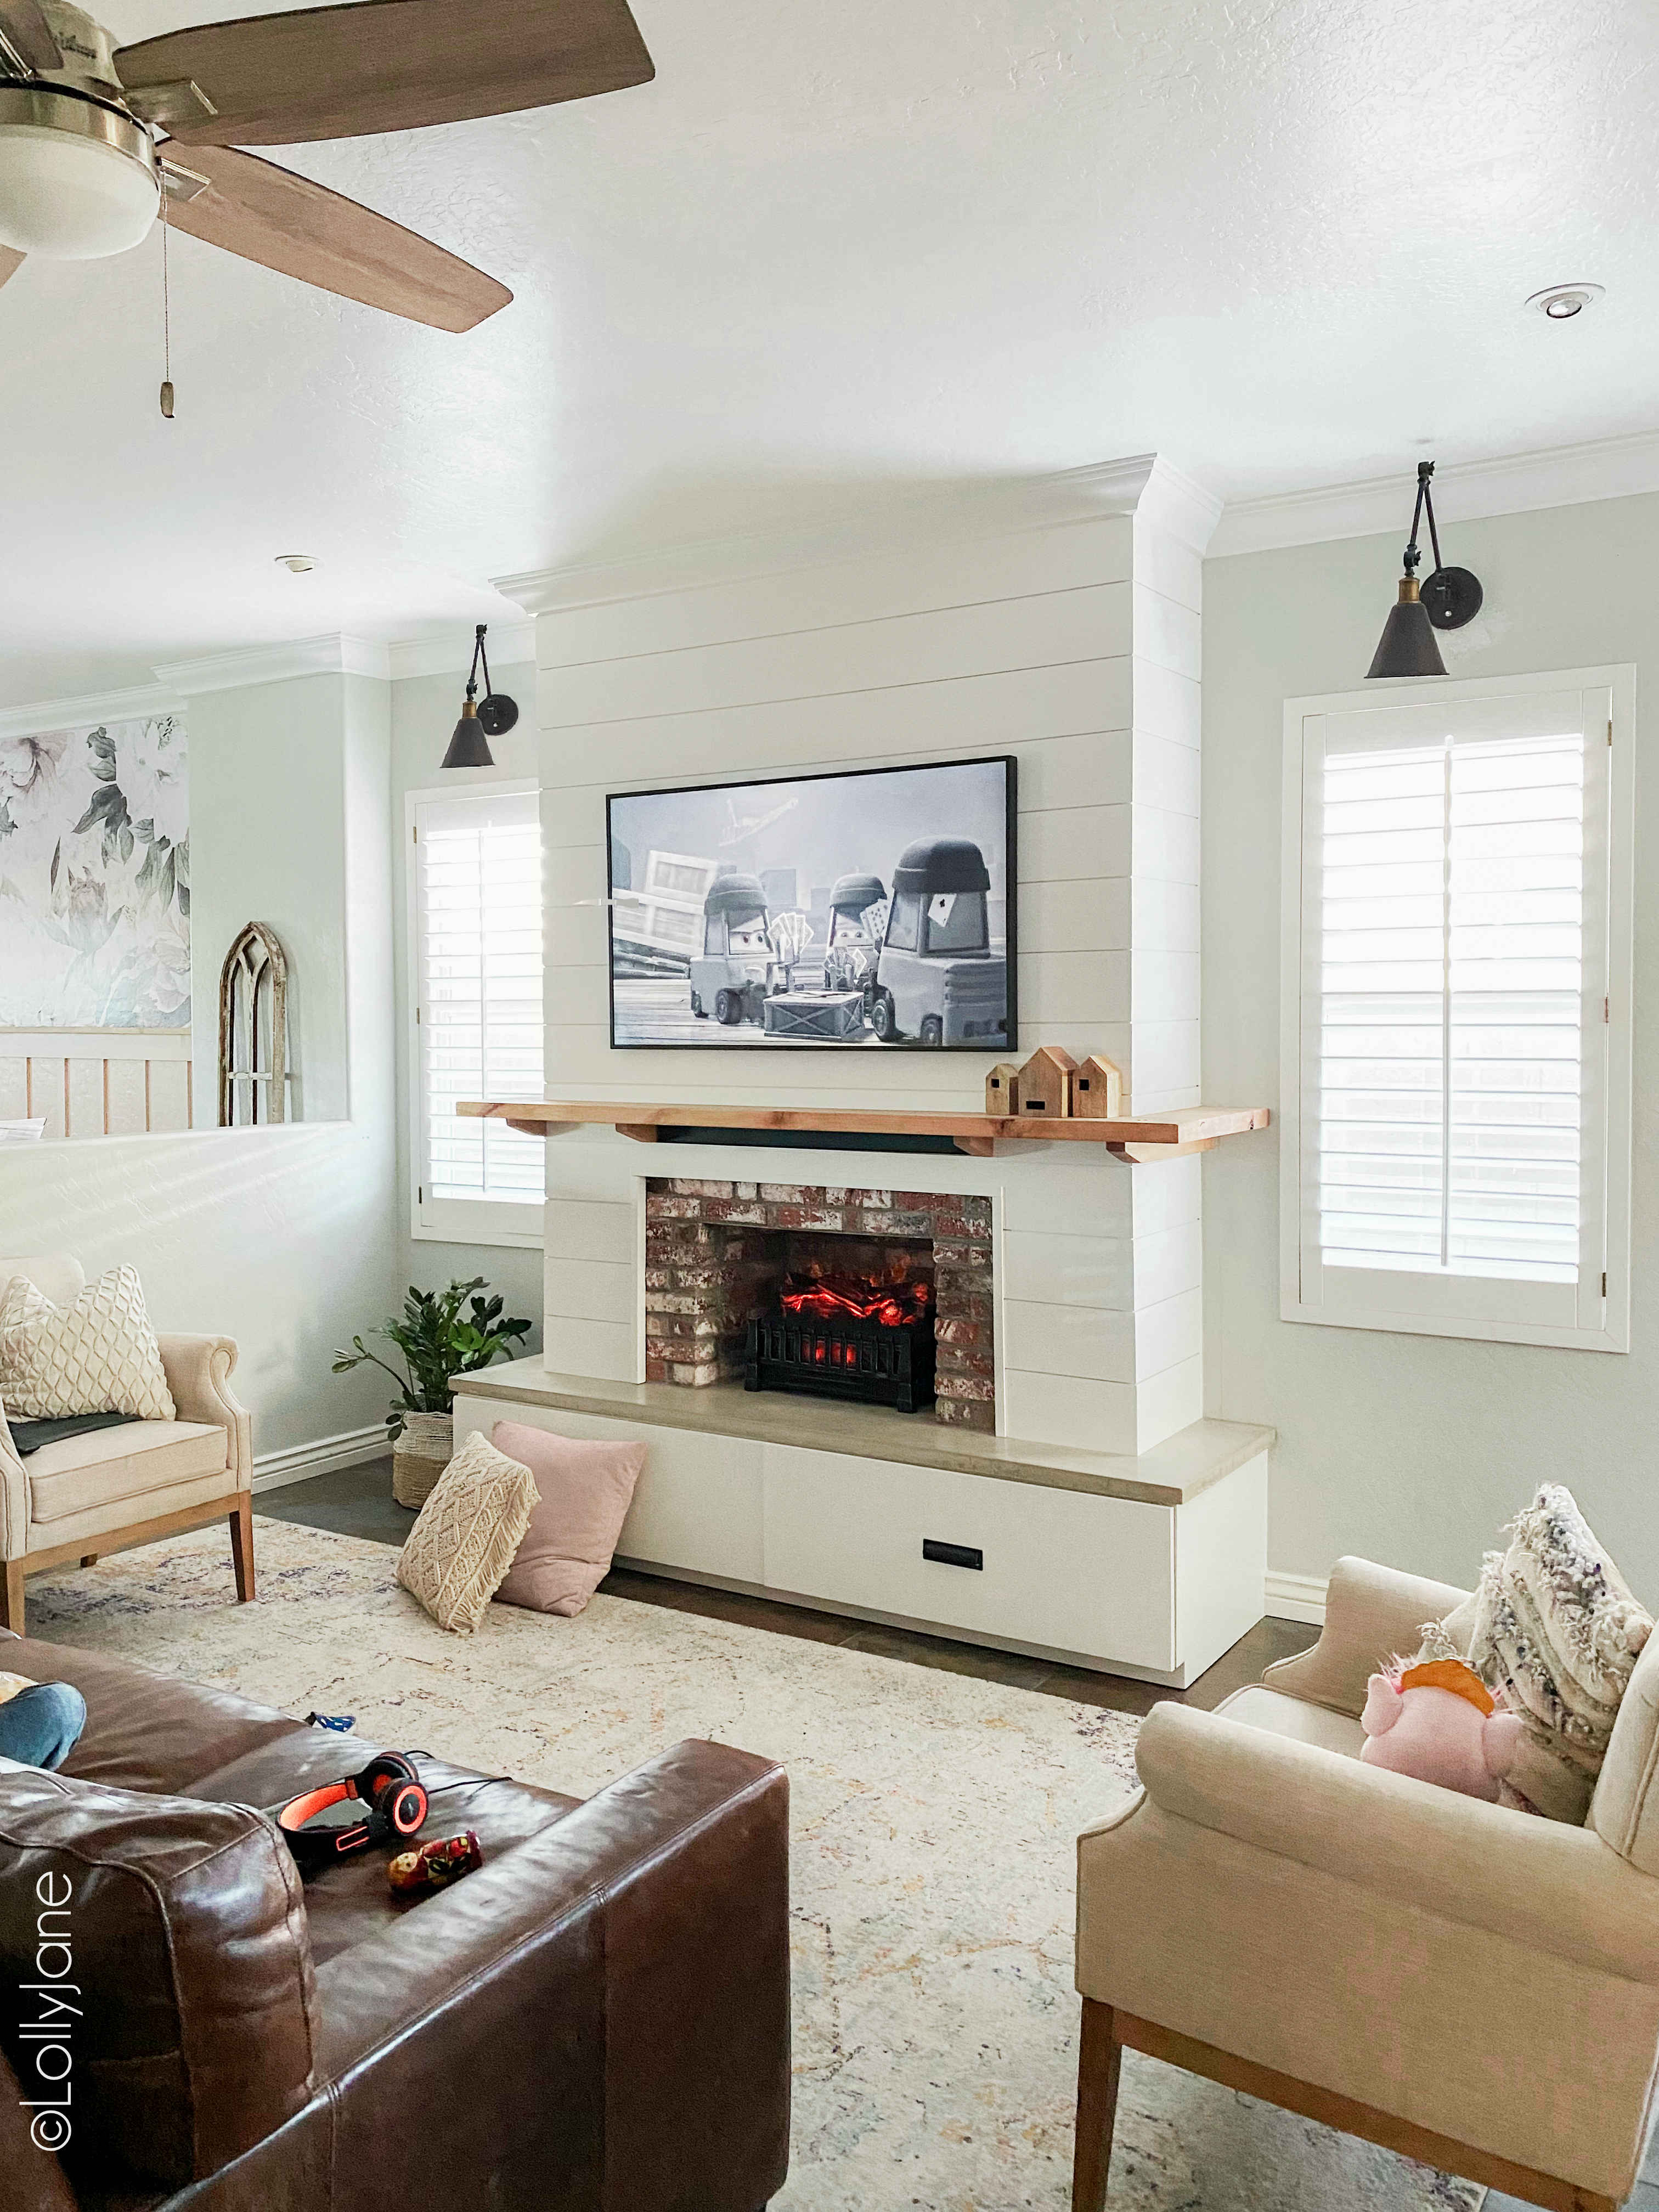 Beautiful modern farmhouse style entertainment system... bet you thought this was a real fireplace! Look at these 5 secret built-in features! #modernfarmhouse #fauxfireplace #entertainmentsystem #diy #diyhomedecor